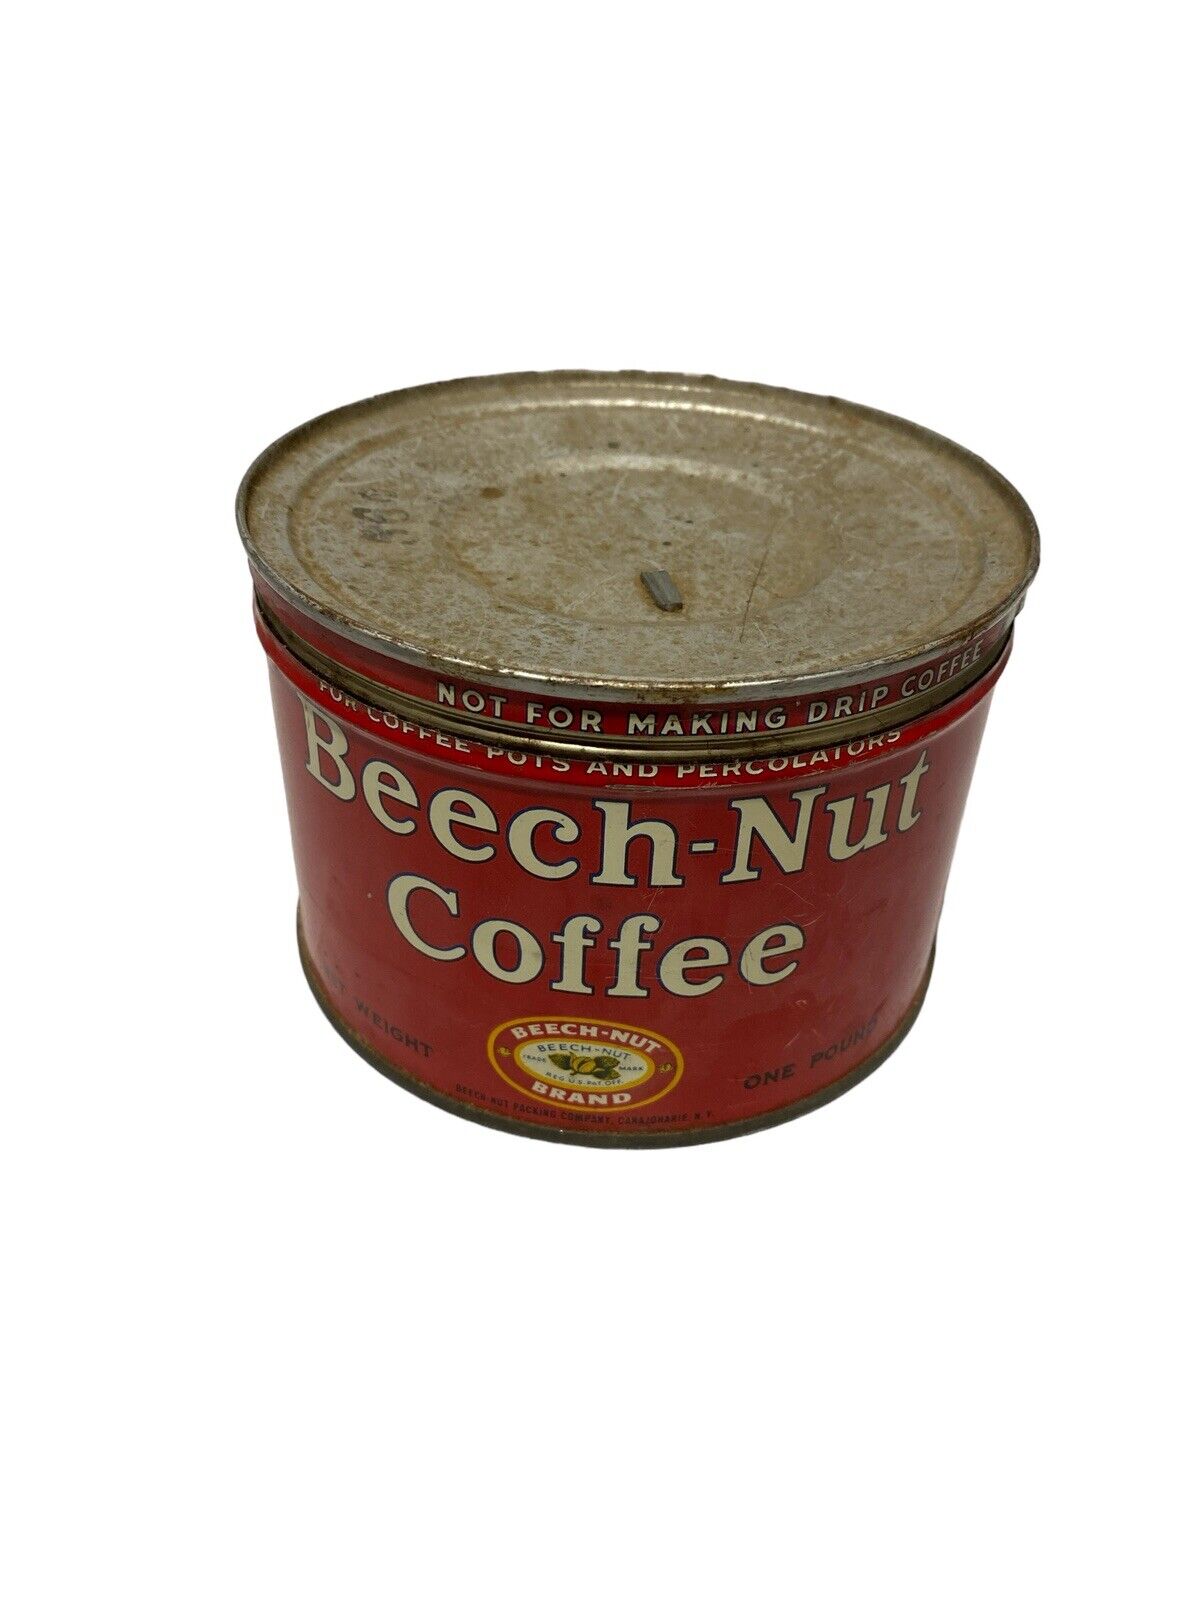 Vintage Coffee Tin BEECH-NUT COFFEE Advertising Collectible